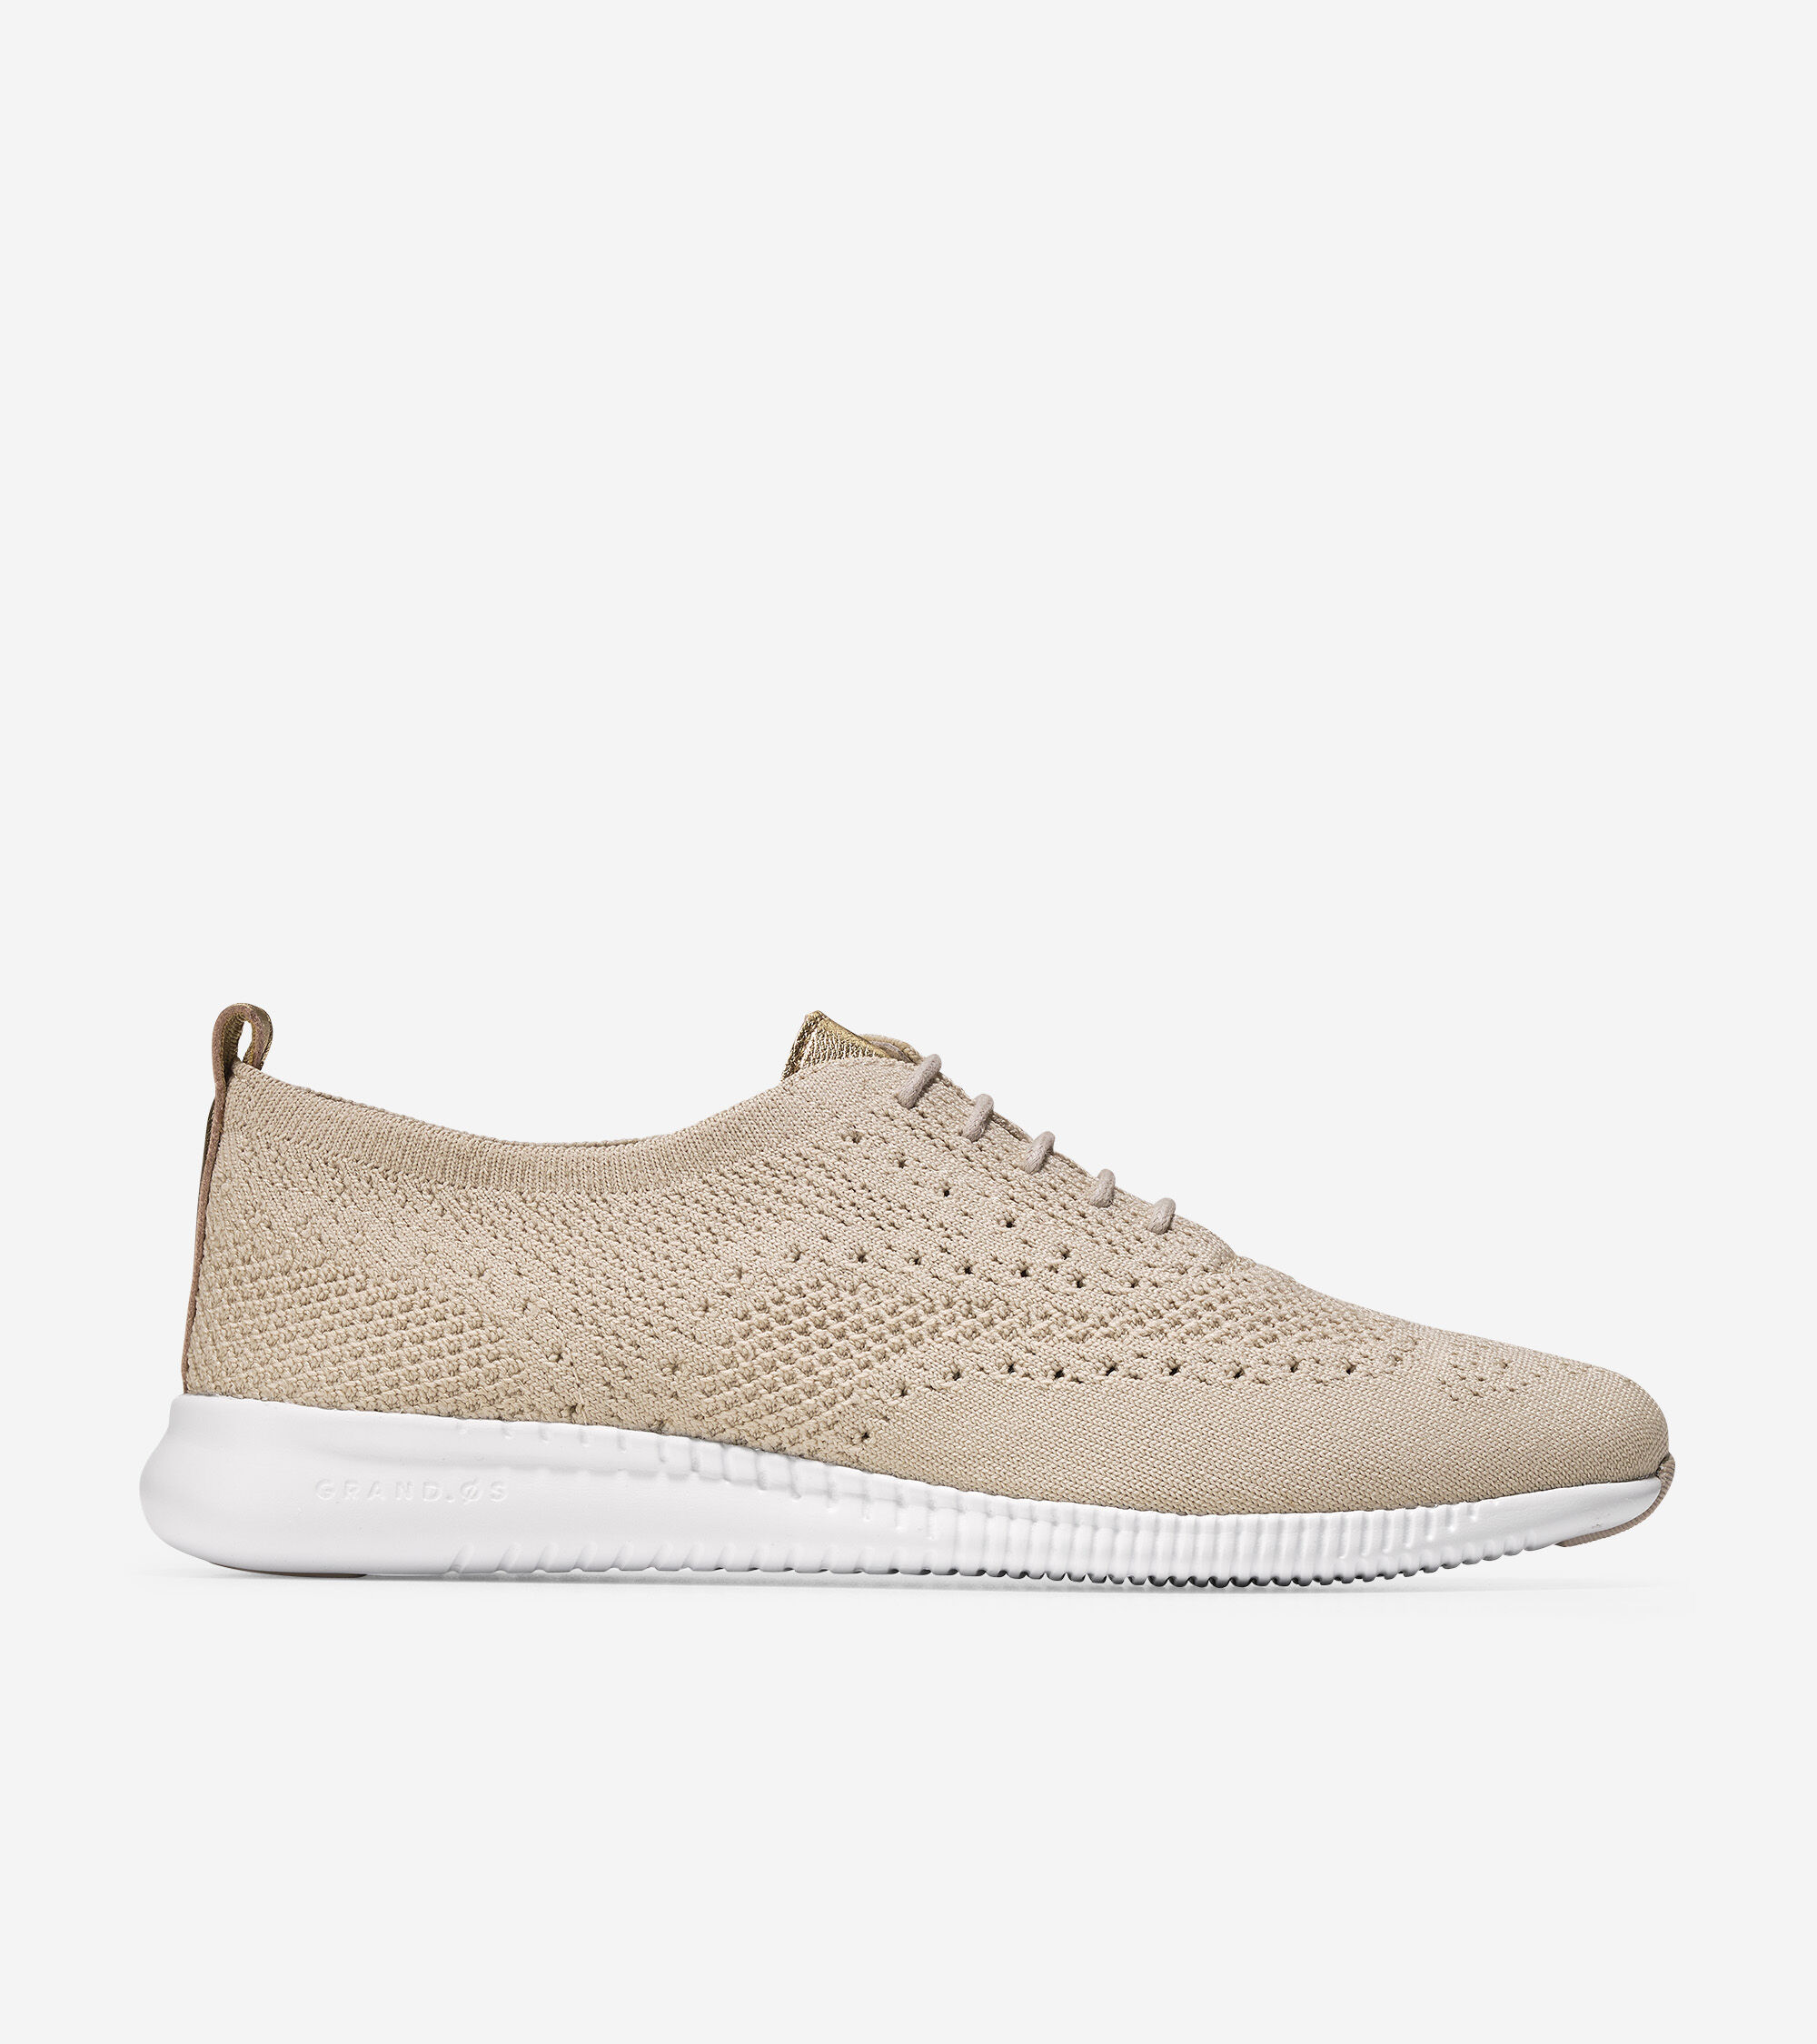 GRAND Collection Shoes on Sale | Cole Haan